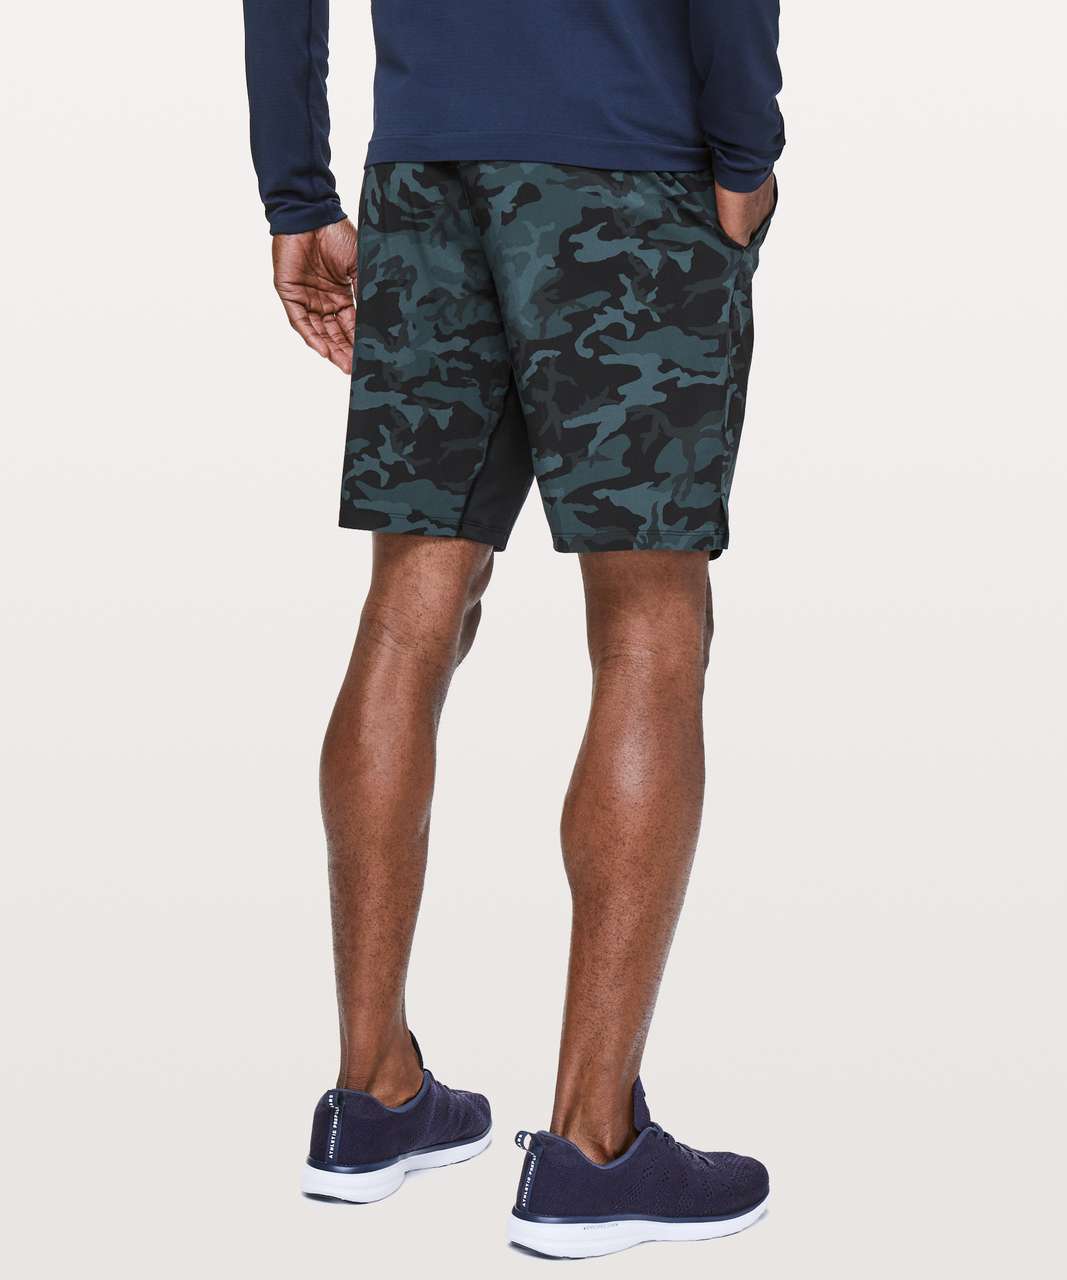 Lululemon T.H.E. Short *Linerless 9" Updated - Incognito Camo Blue Multi